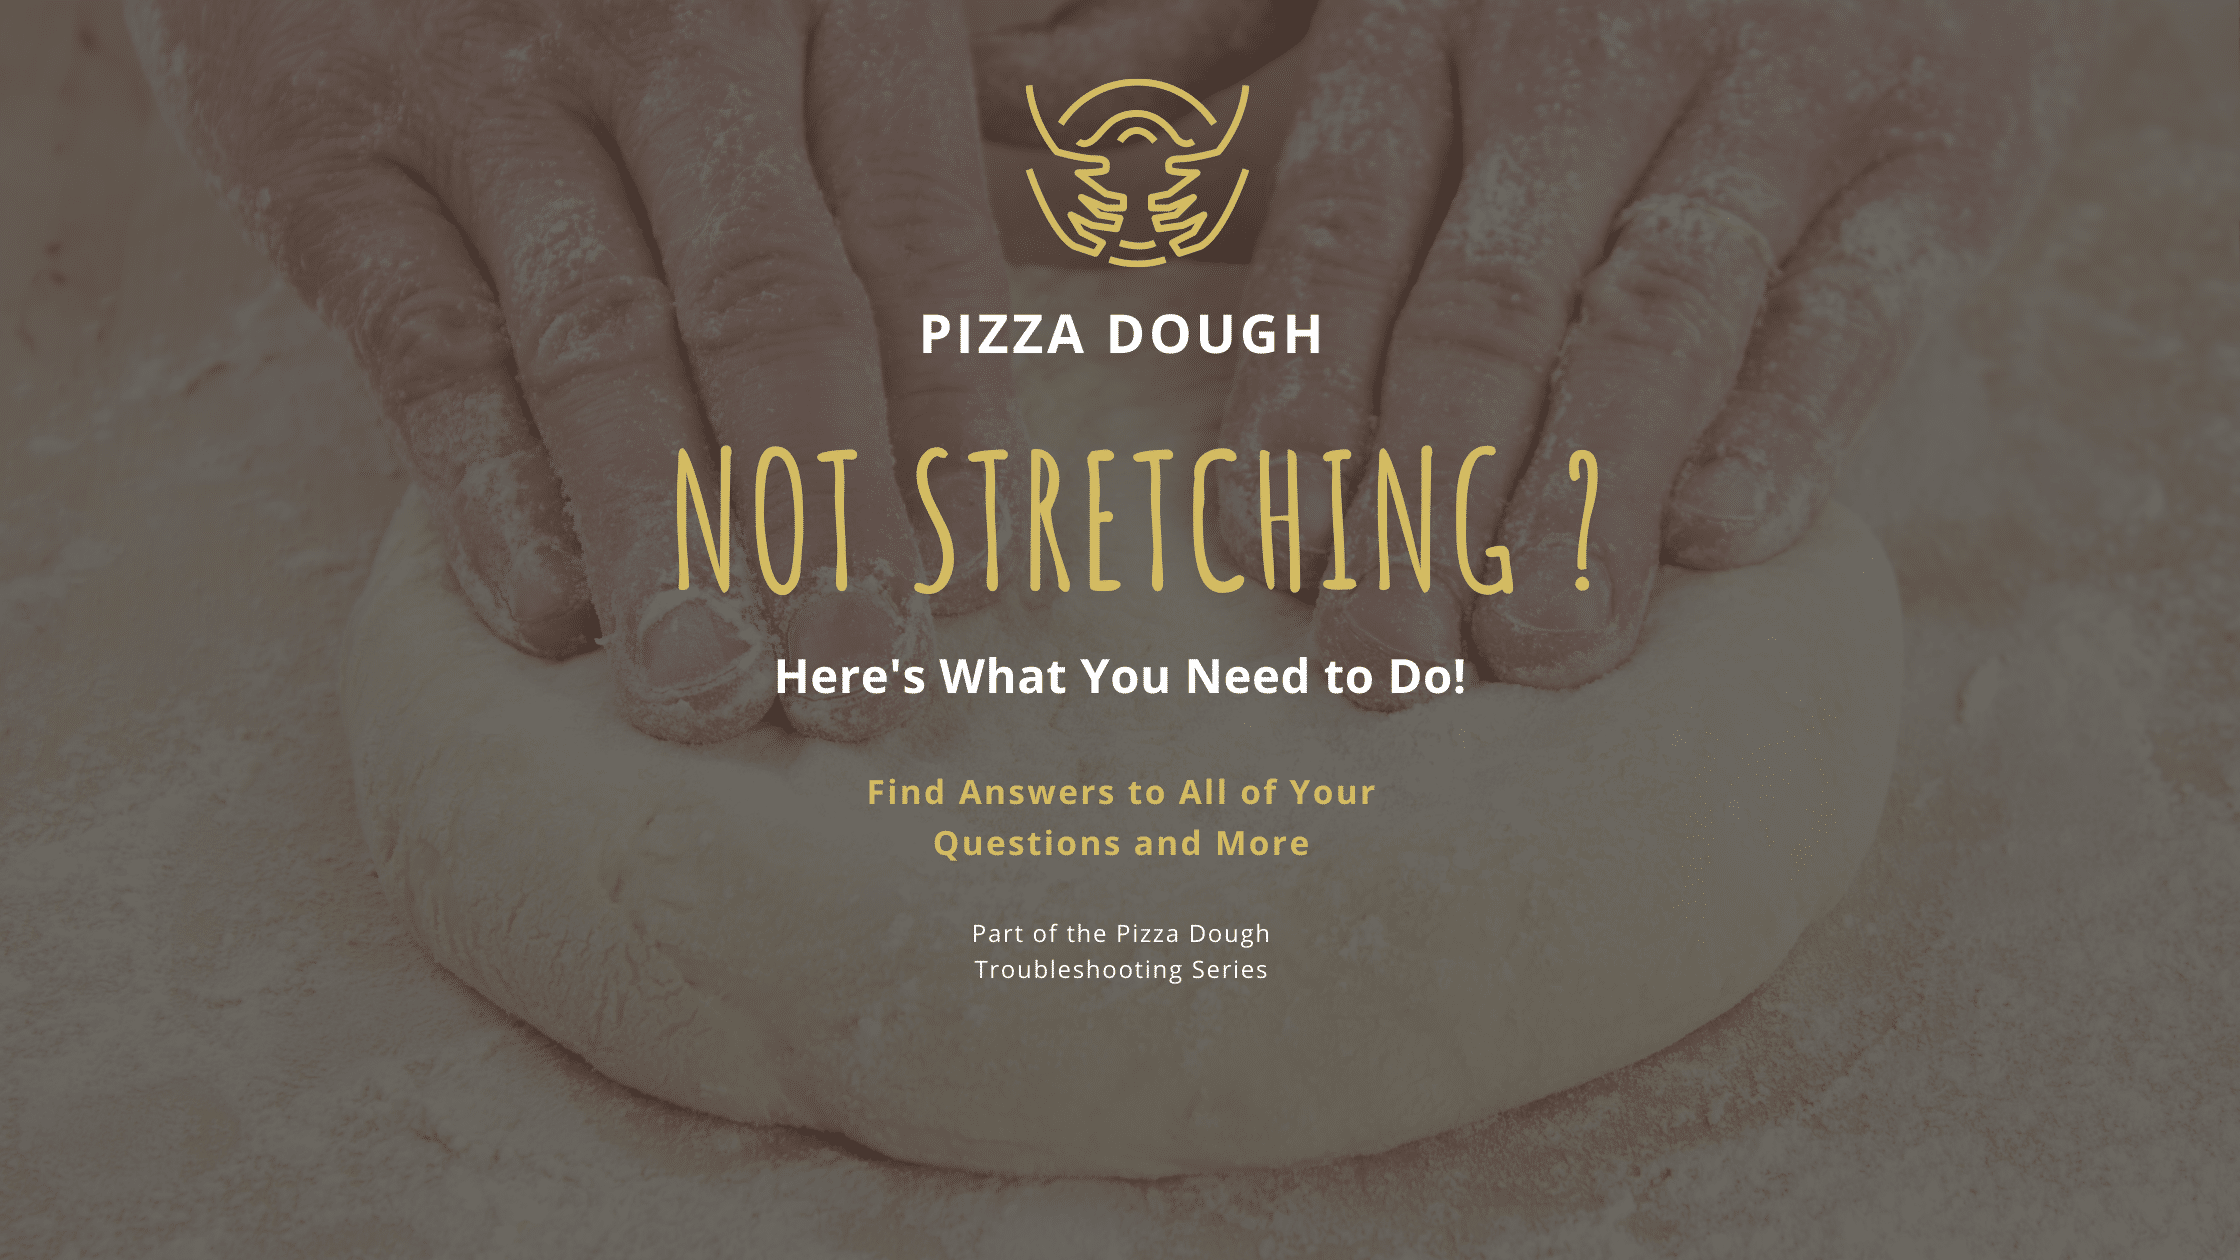 Pizza Dough Not Stretching:  Here’s What You Need to Do